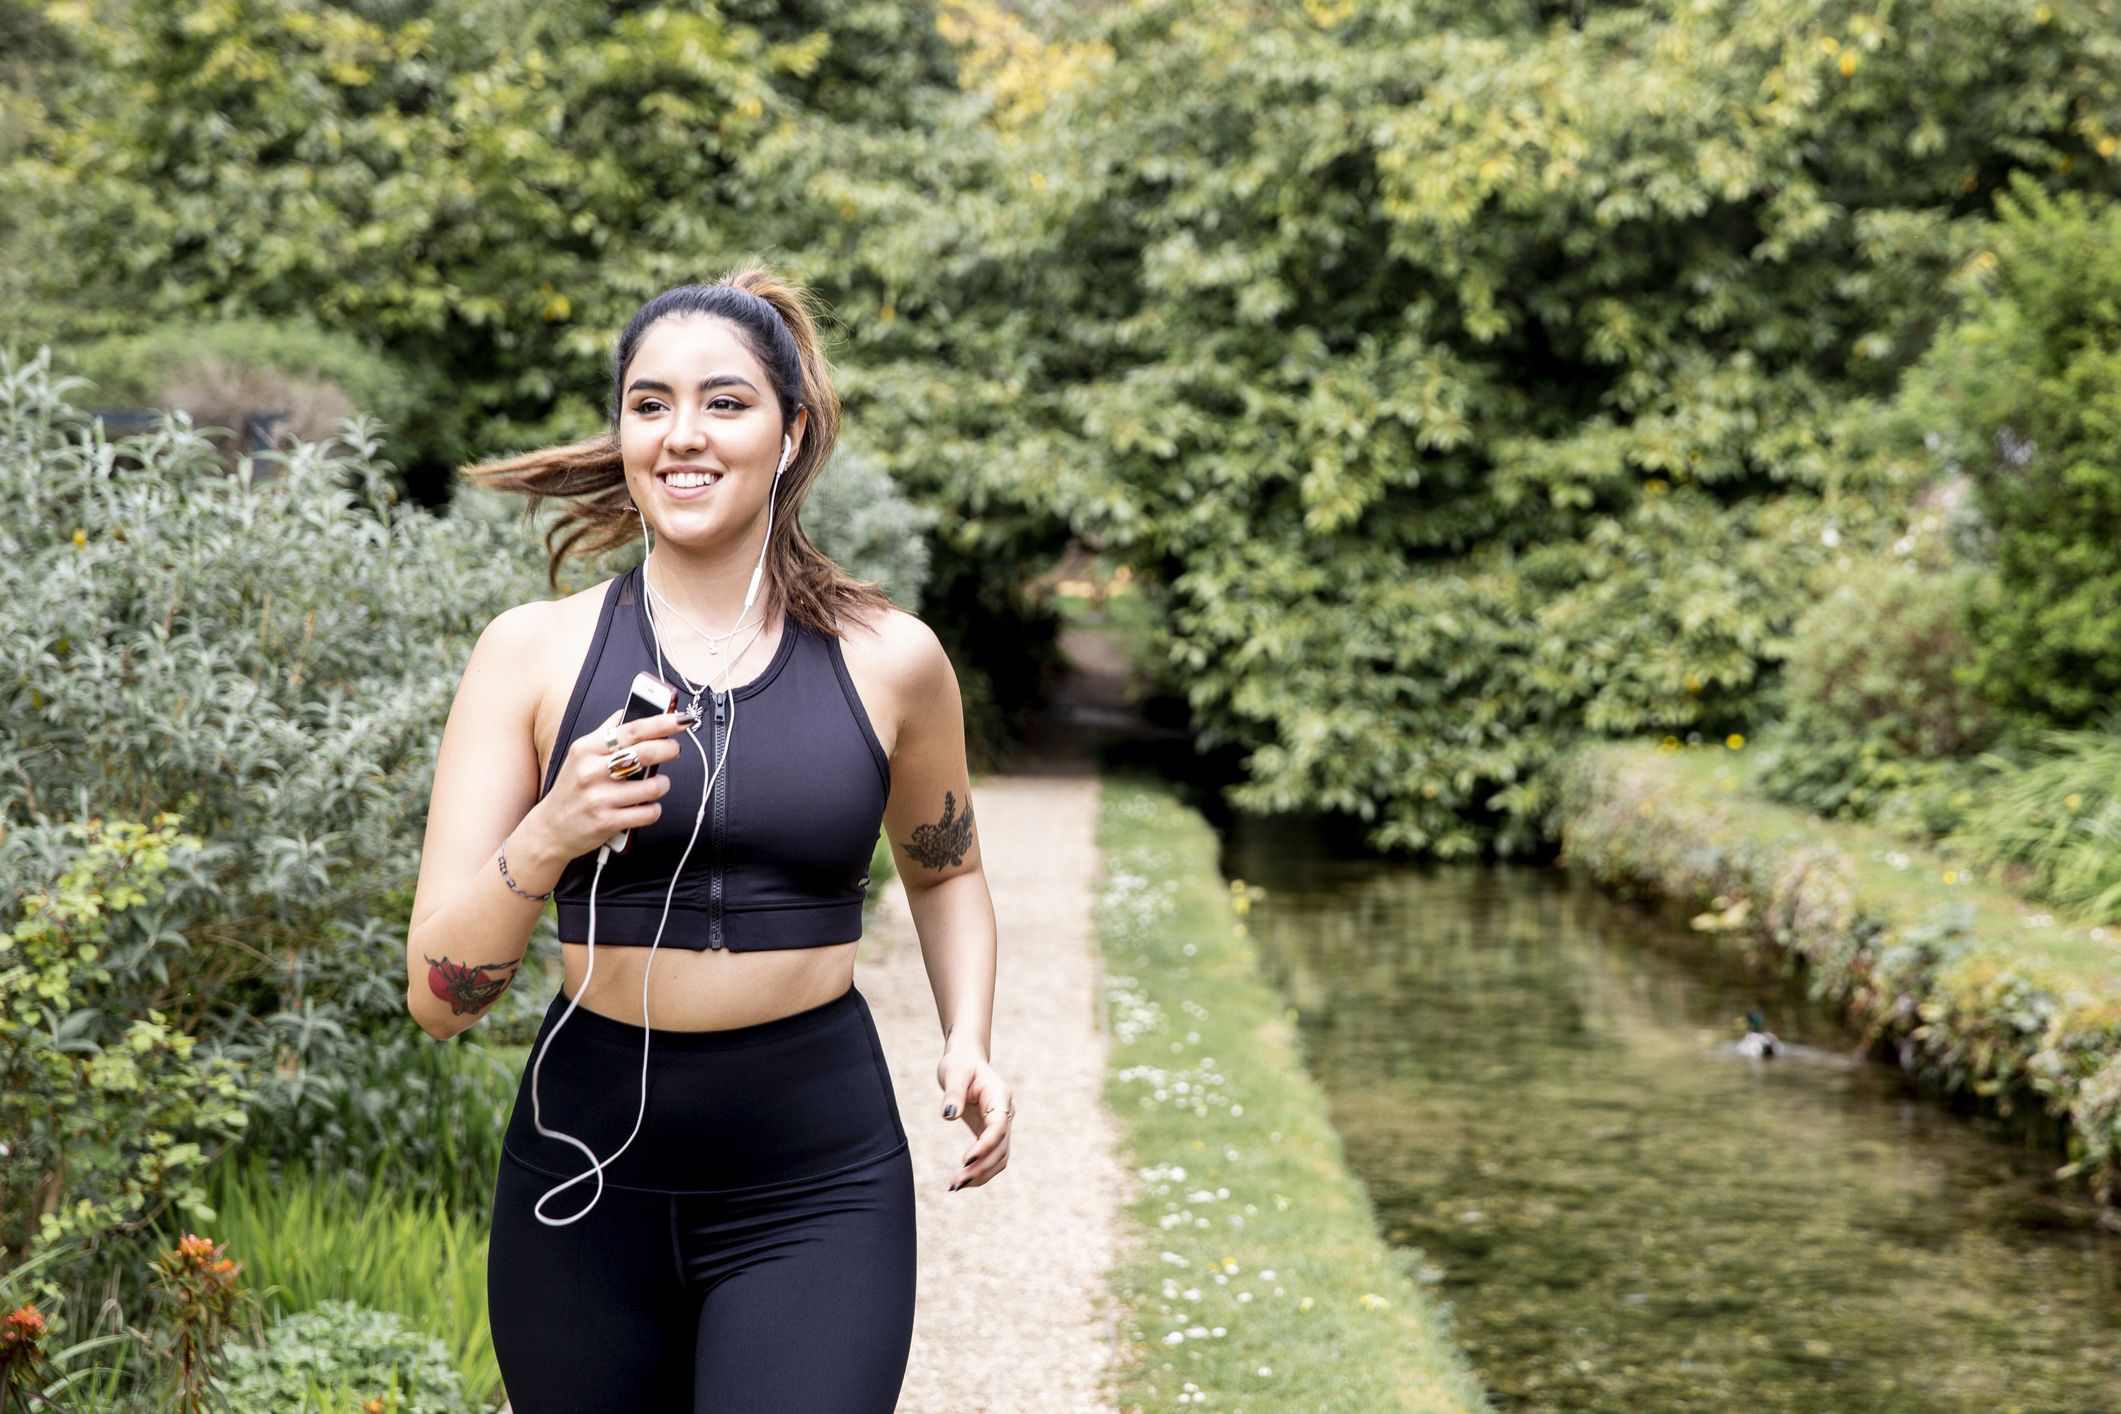 Running A Mile A Day: The Pros And Cons For Your Health